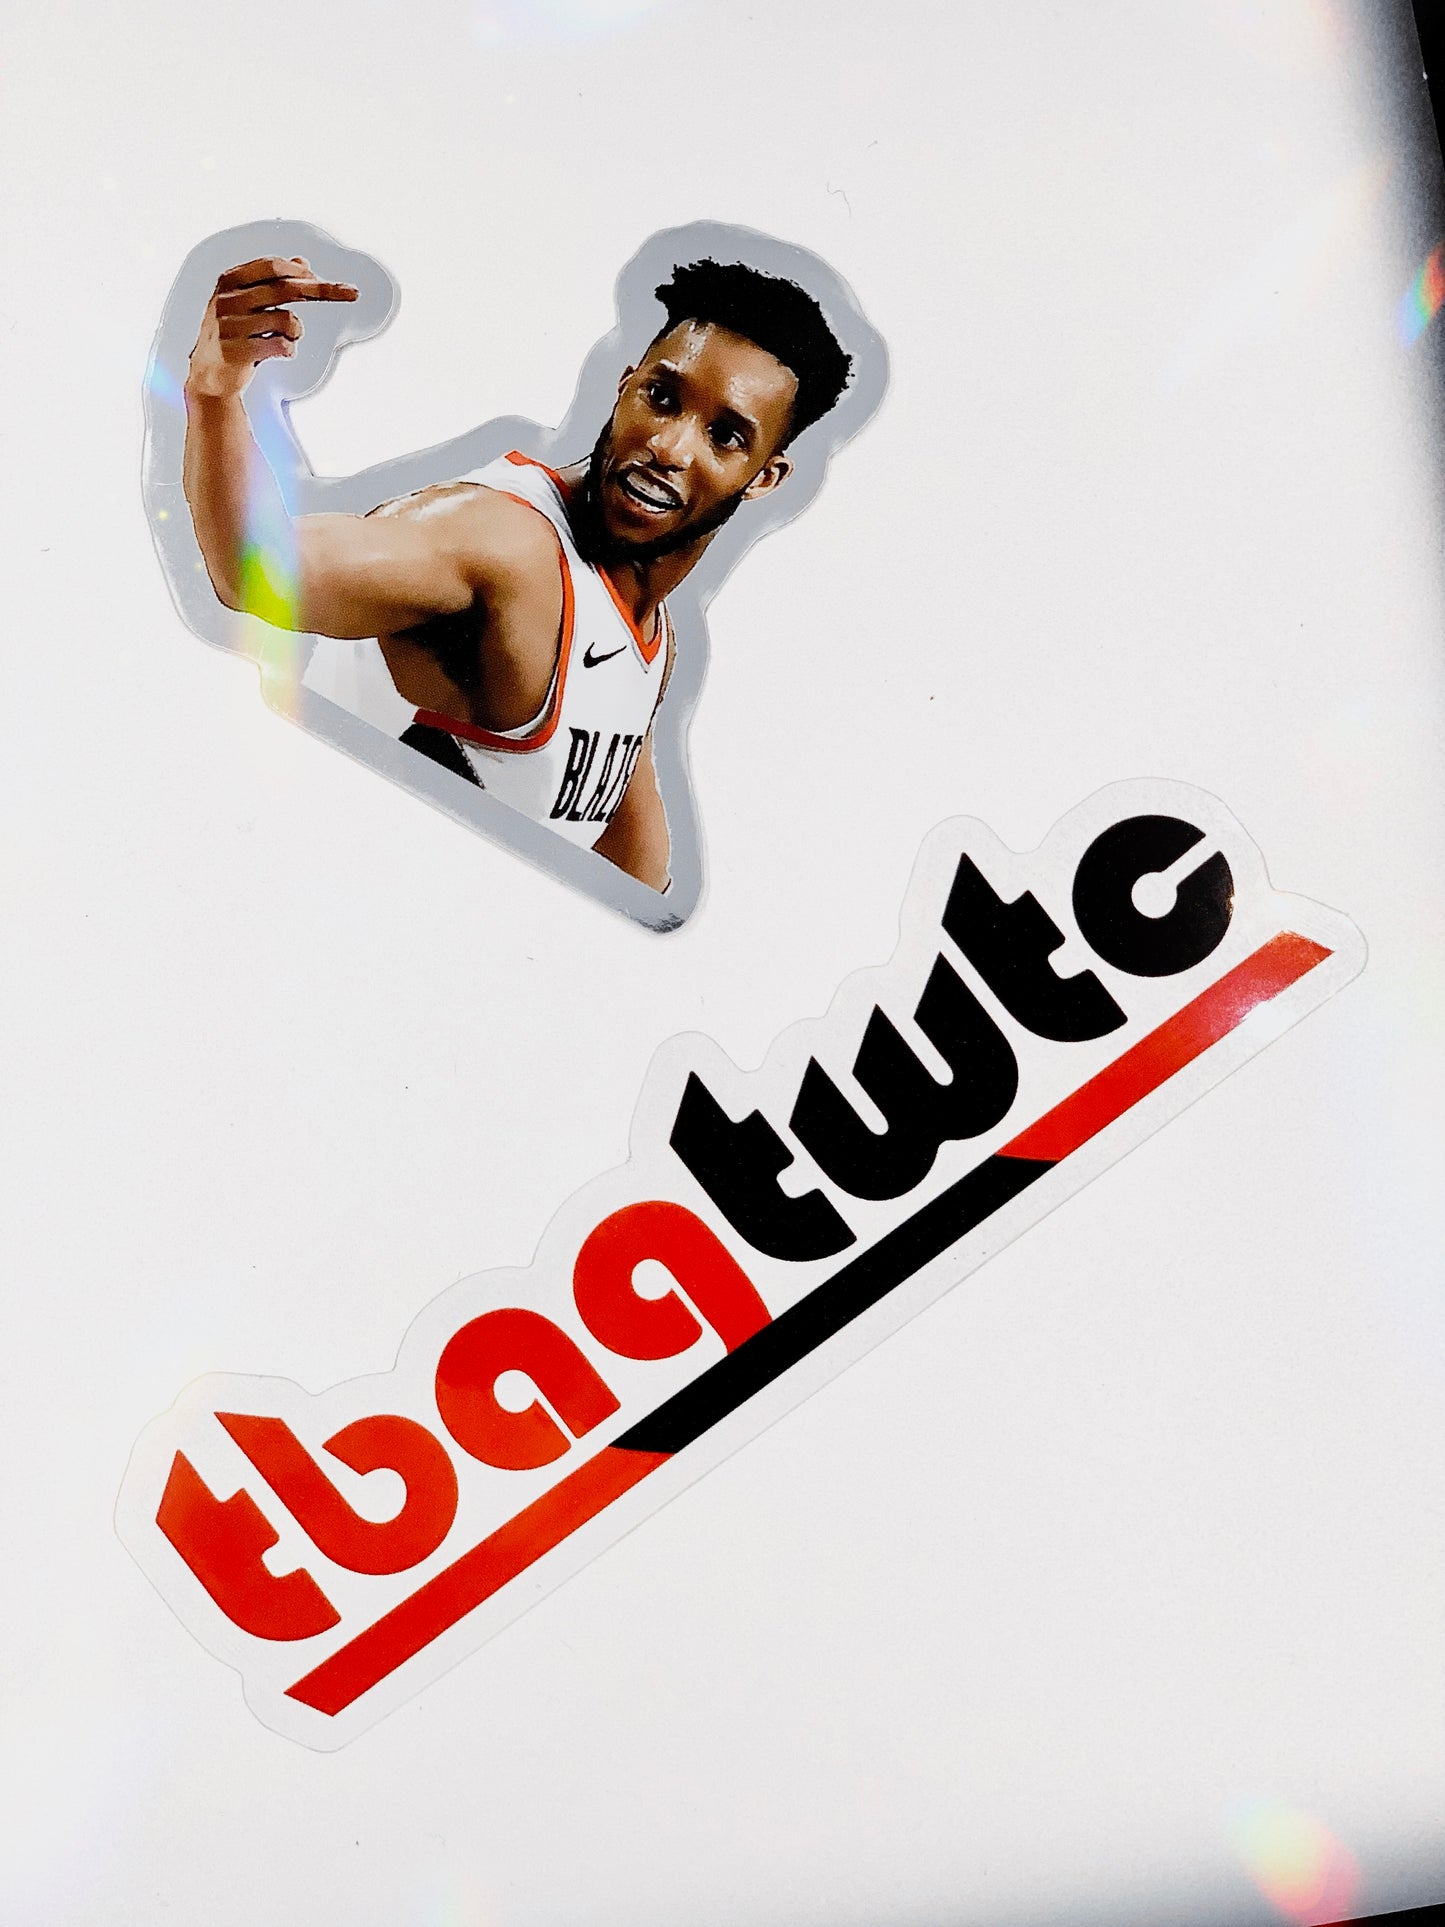 Transparent TBAGTWTC Sticker The Blazers Are Going To Win The Championship